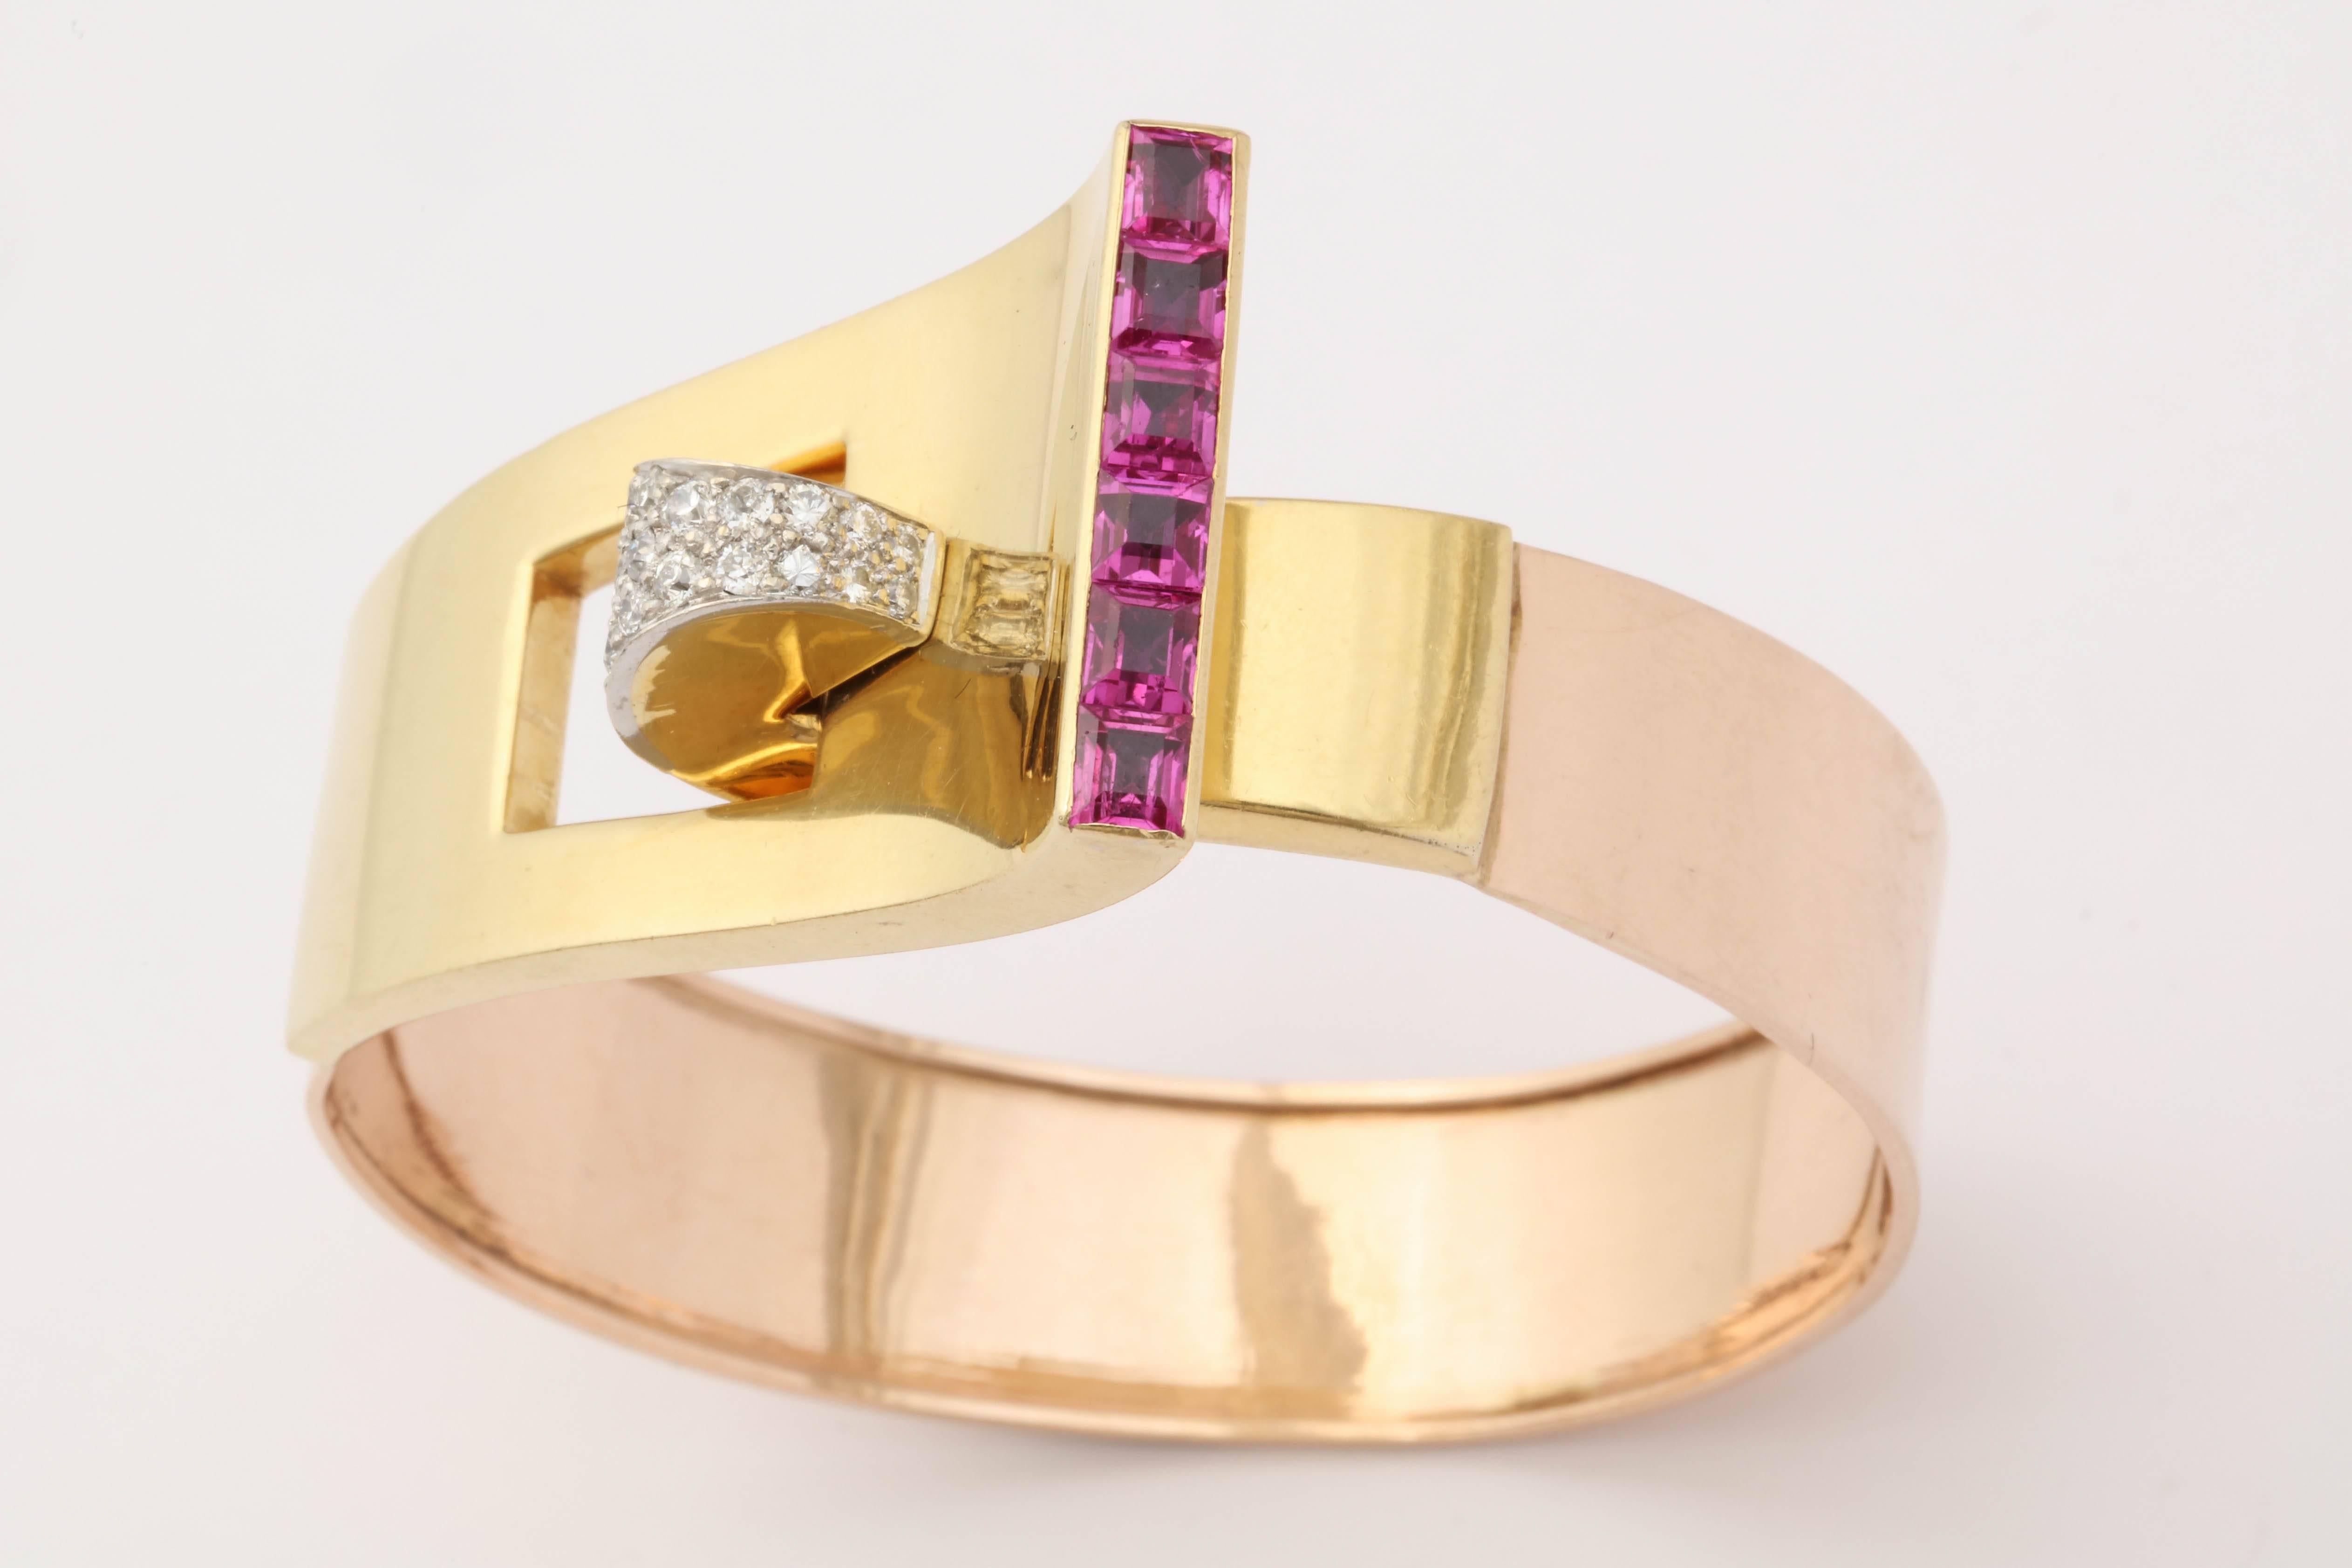 One Ladies Cuff Bangle Bracelet Designed In High Polish 14kt Pink Gold And 18kt Yellow Gold In The Form Of A Belt Buckle. Bracelet Is Embellished With Six Rectangular Shape Square Cut Pink sapphires Weighing approximately 1.50cts. Further